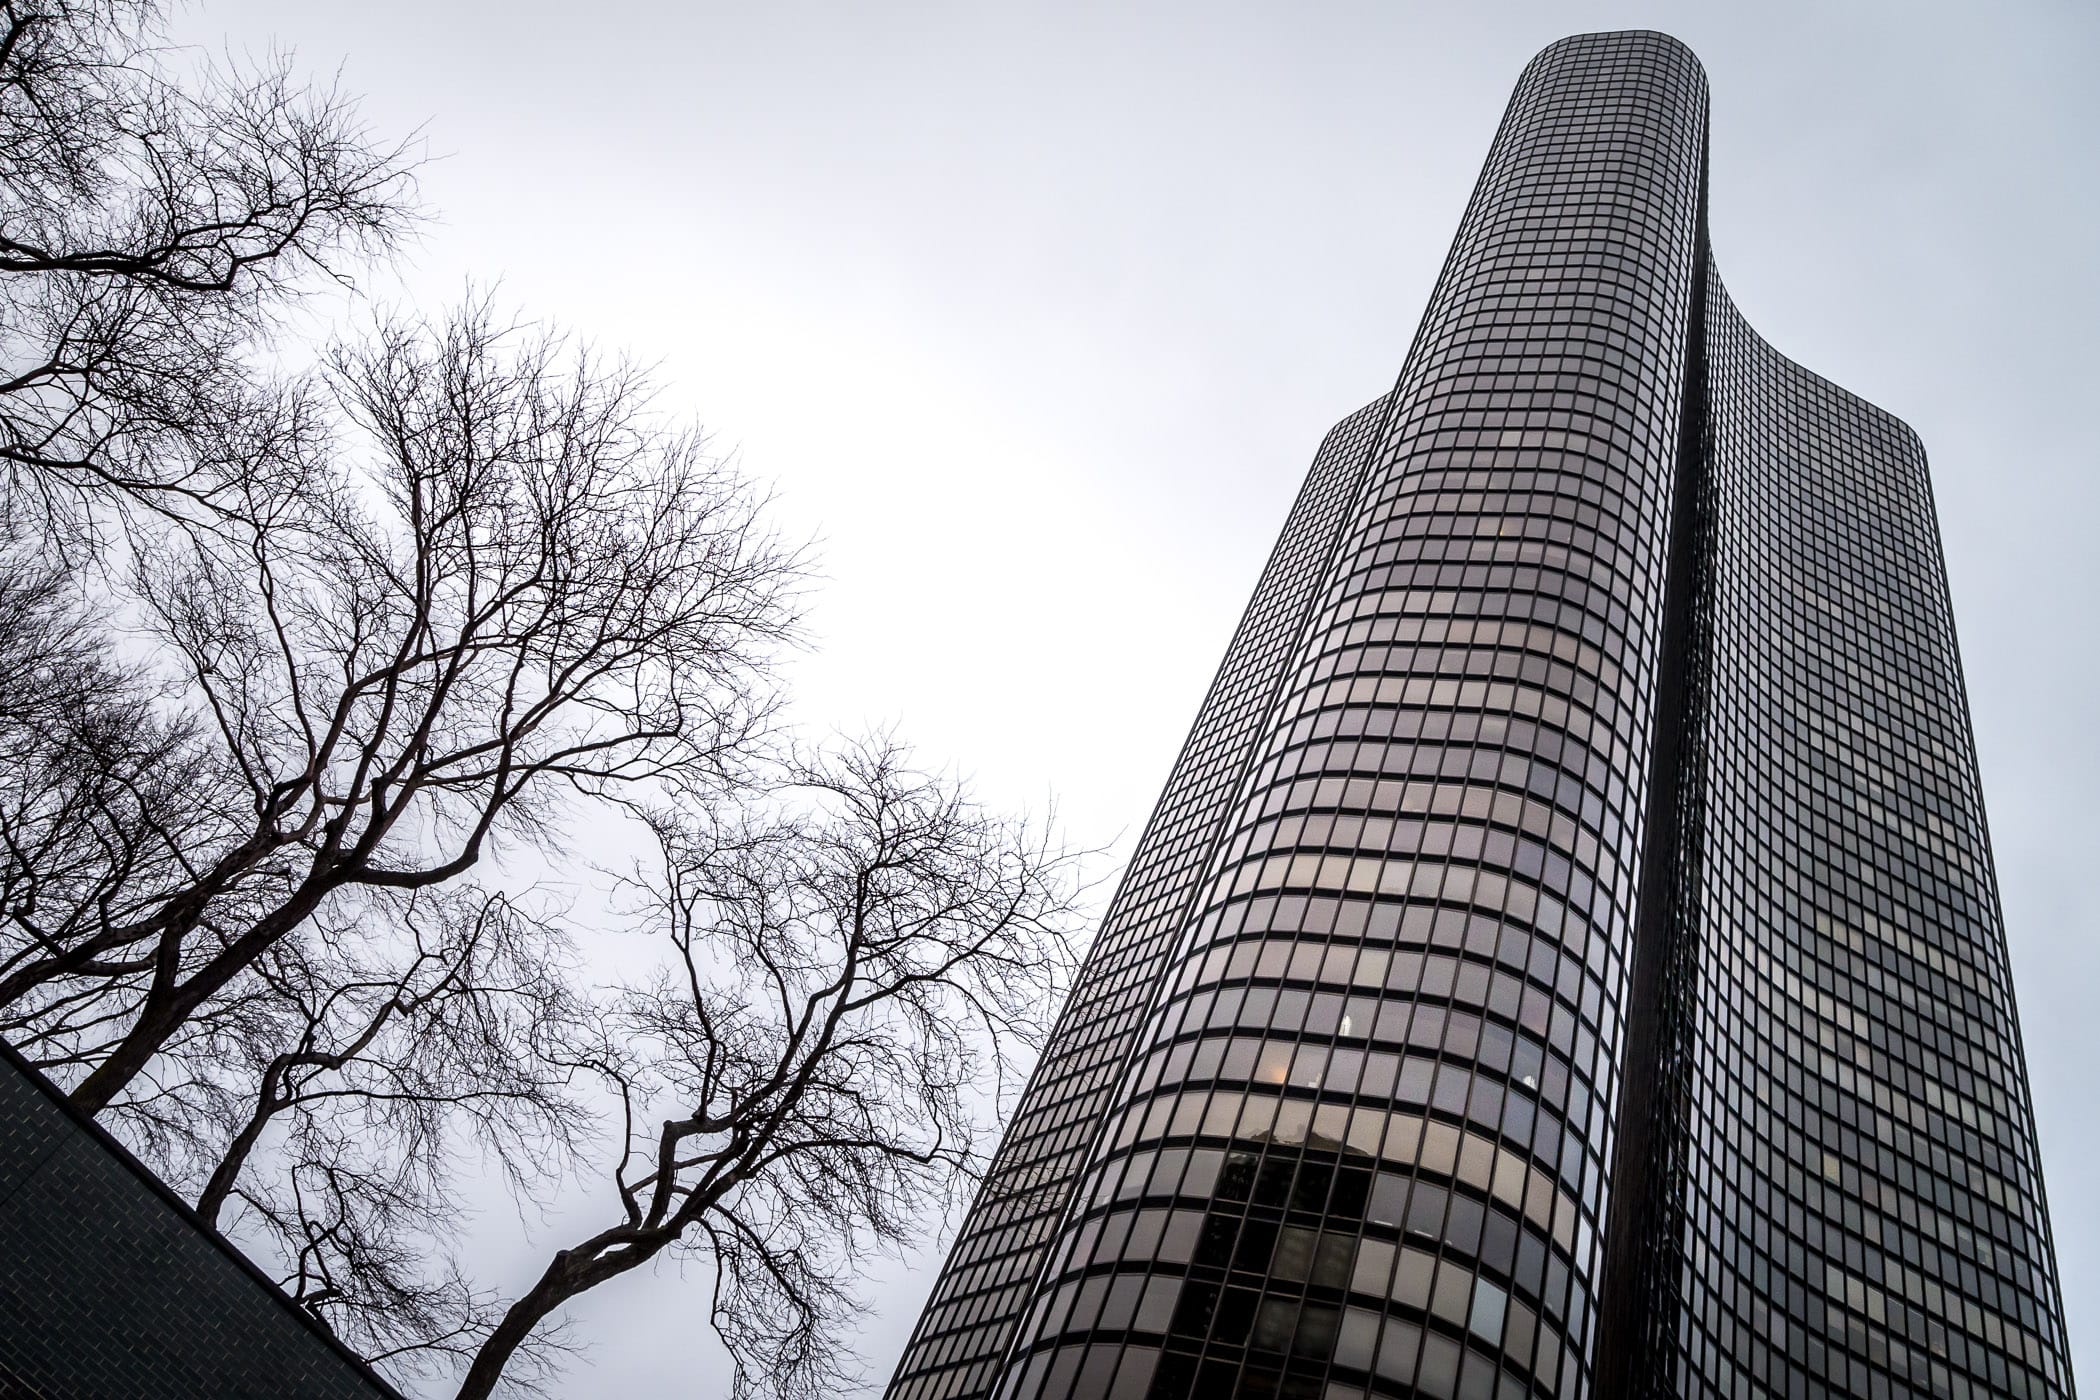 Lake Point Tower rises over barren wintry trees into the overcast Chicago sky.